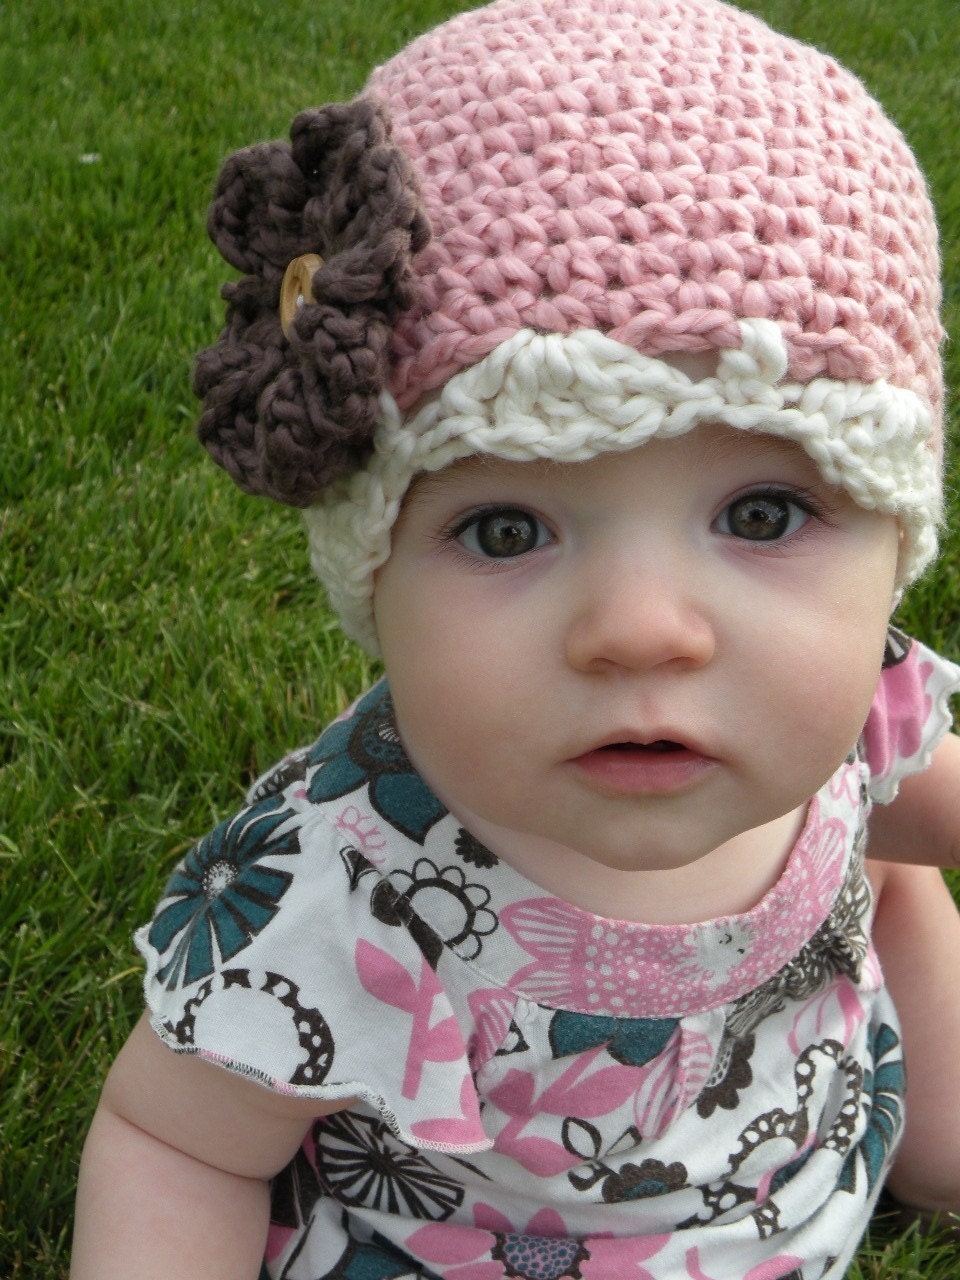 Pink Organic Crochet Baby Hat with Interchangeable Flowers 6-12 Monthsمدل كلاه بافتنی كودكان